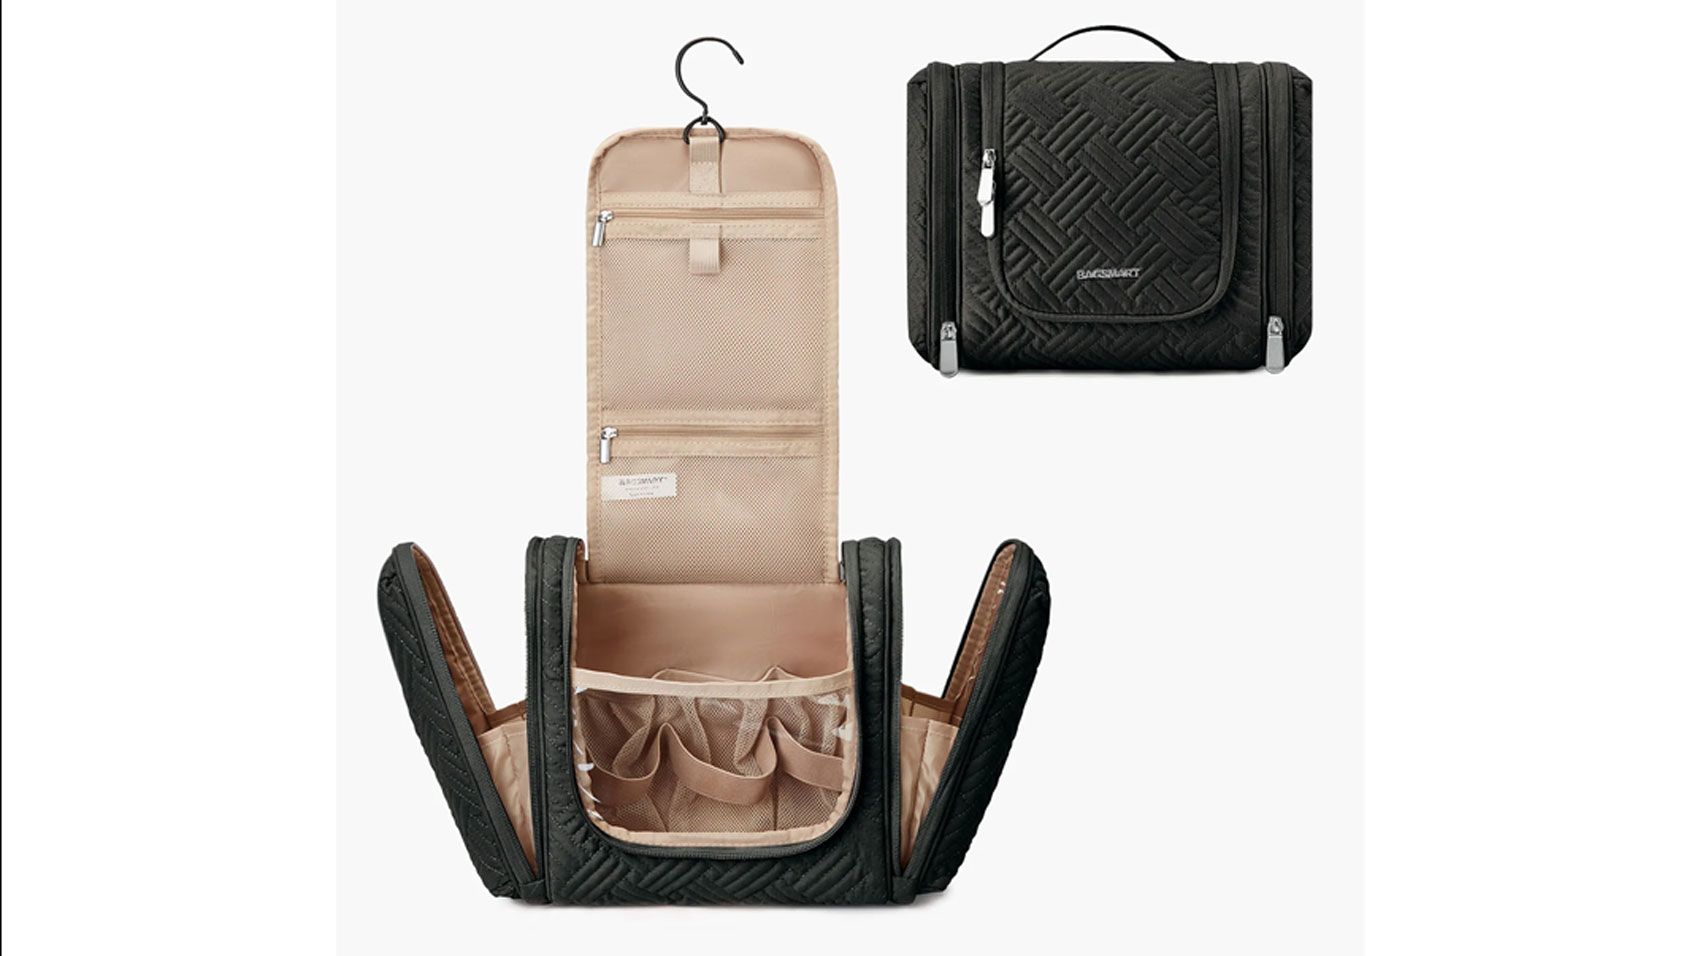 The Basic Toiletry Bag